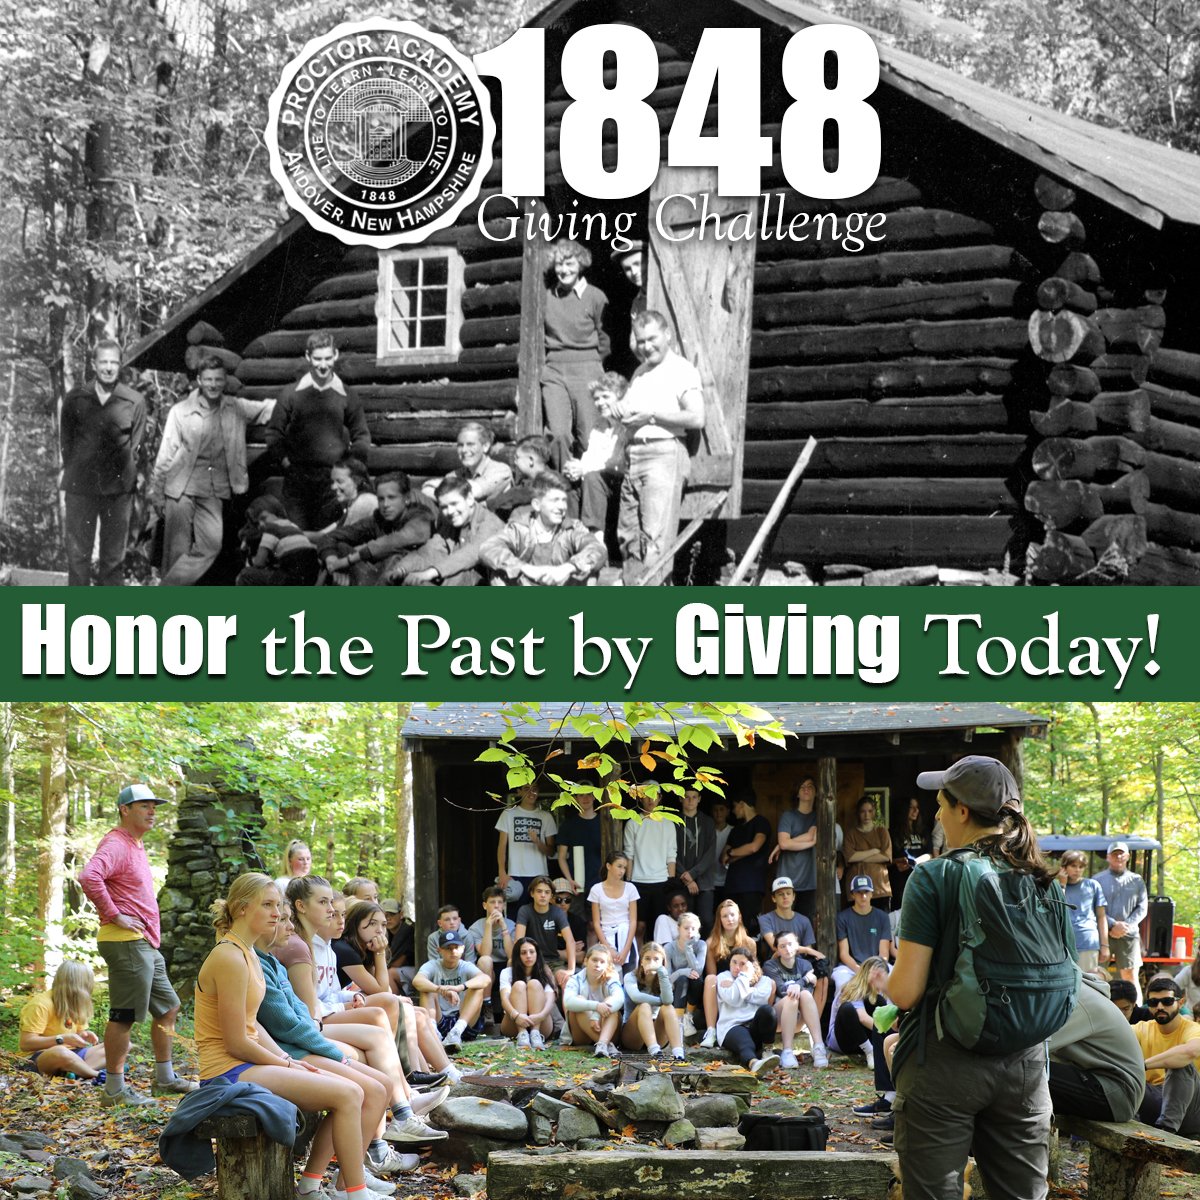 Proctor Academy Annual Giving